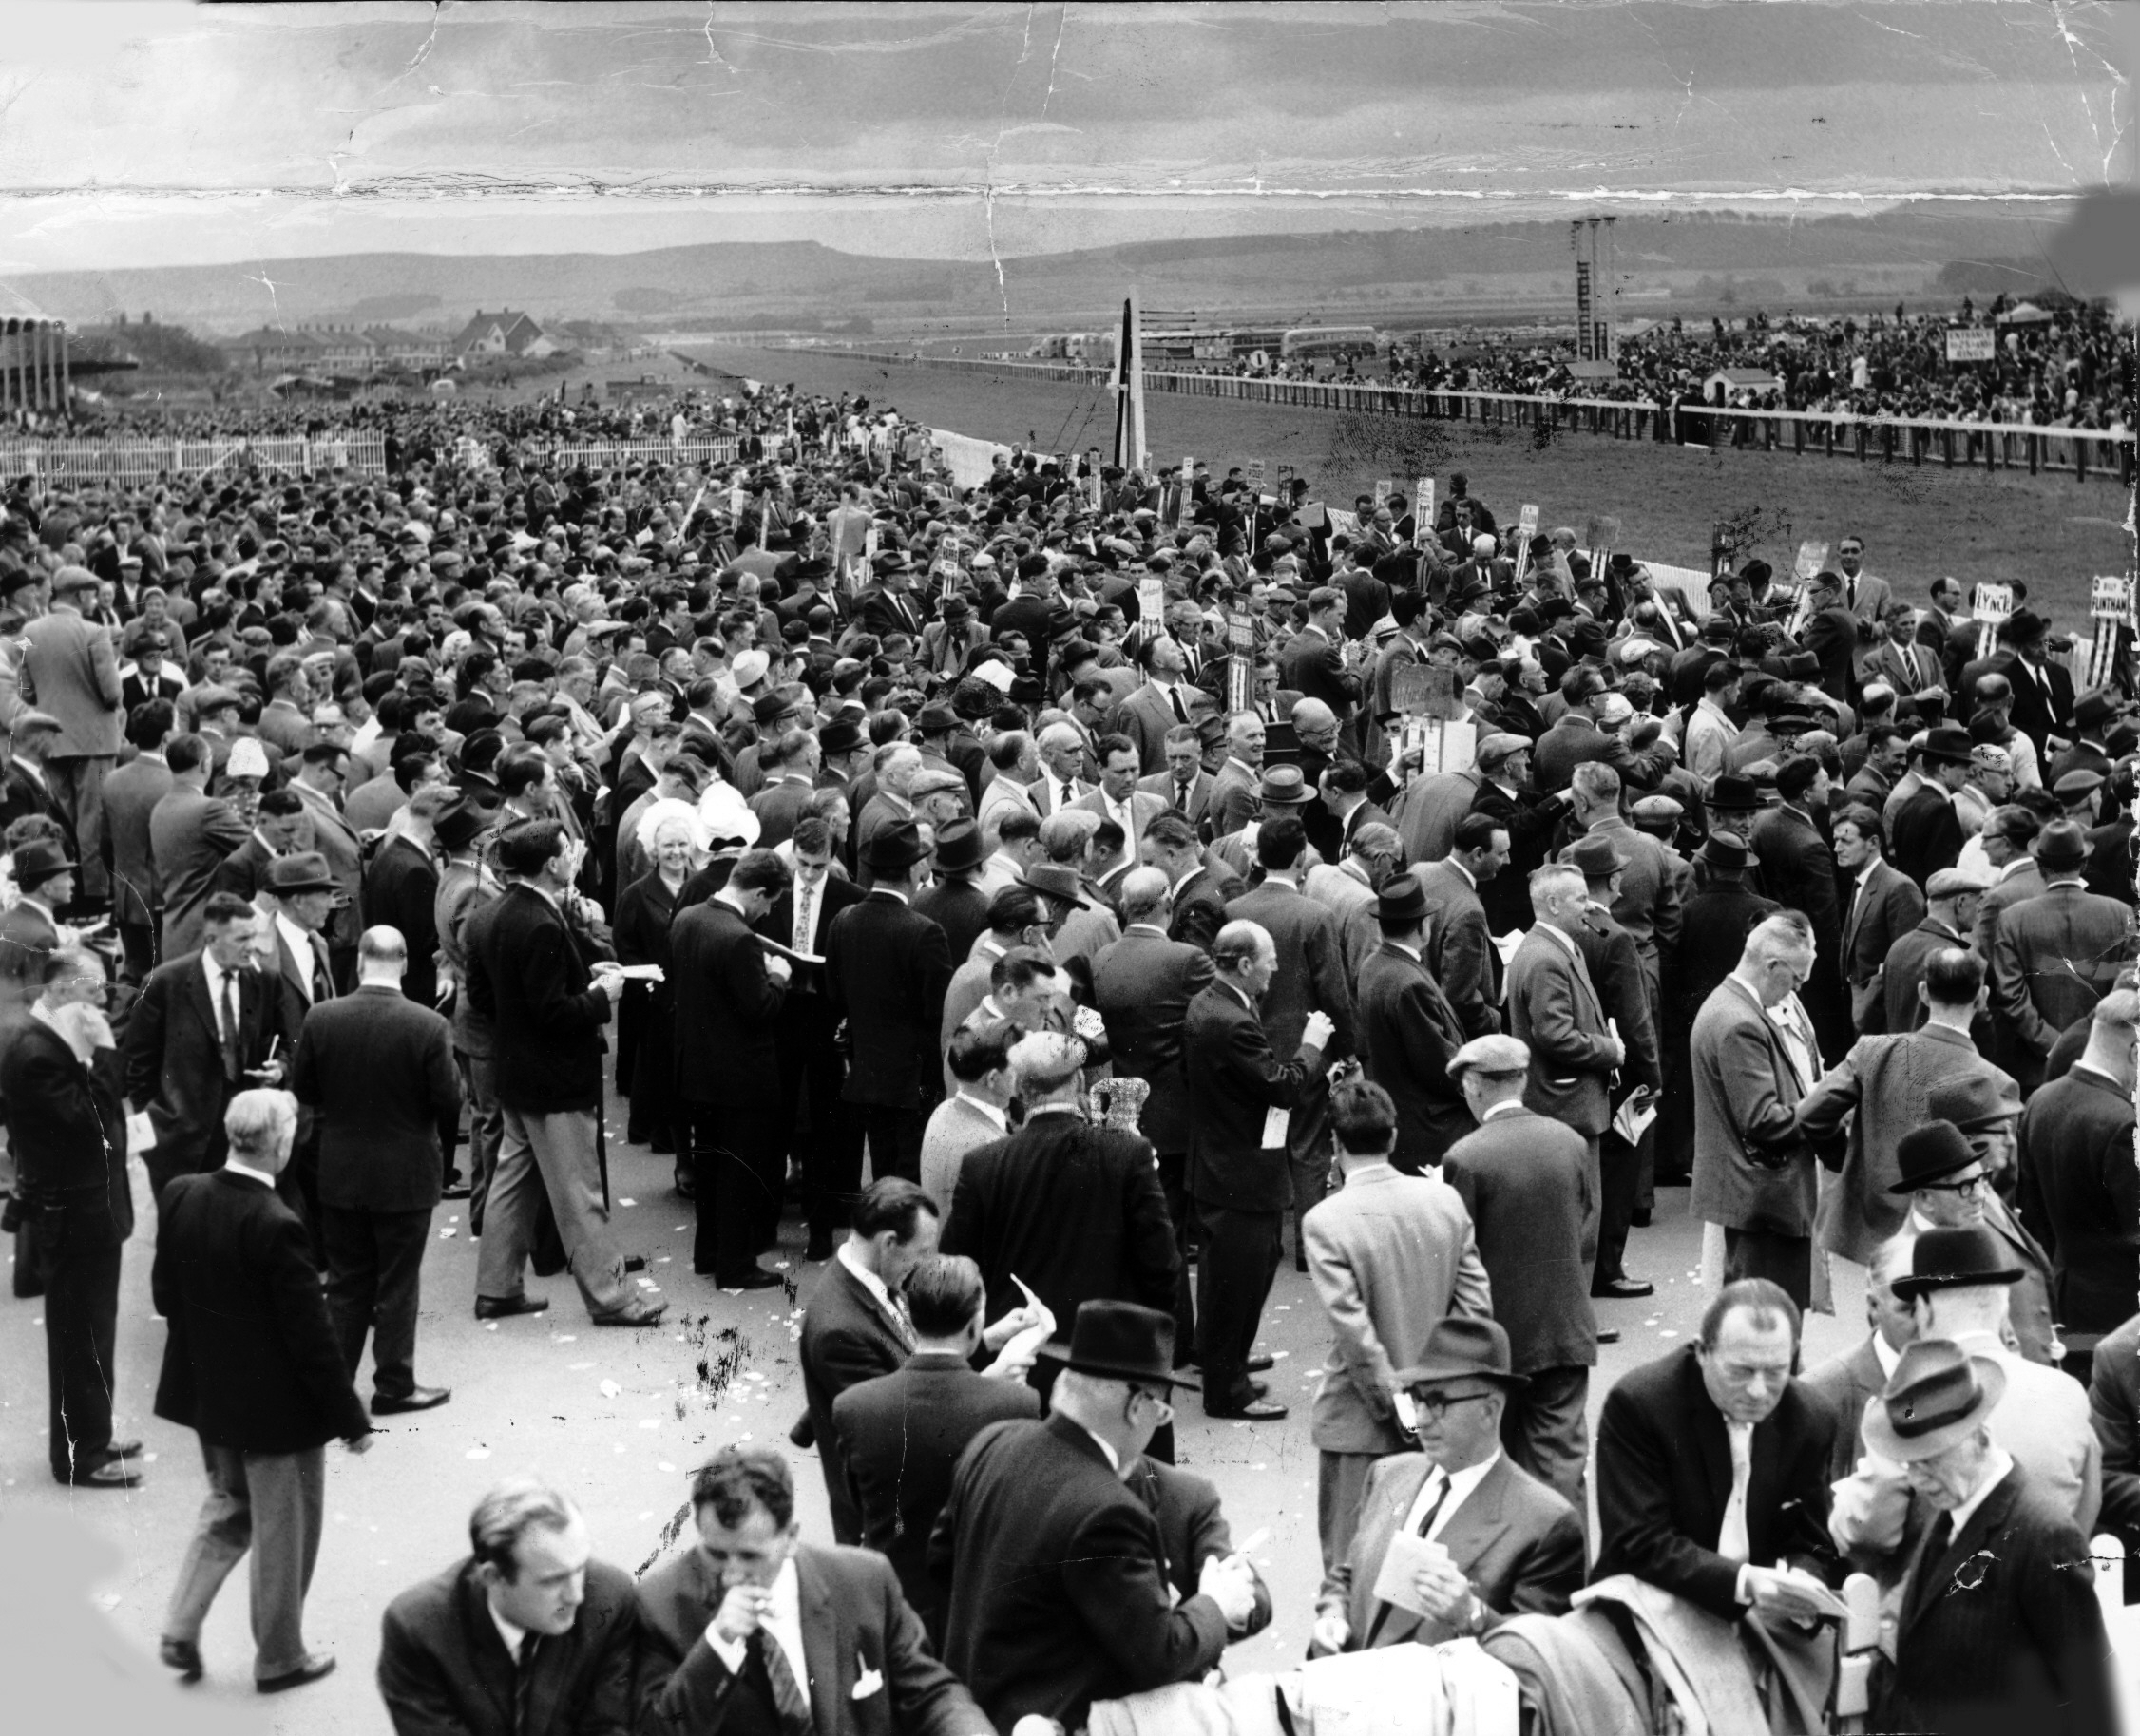 At Redcar races in 1962